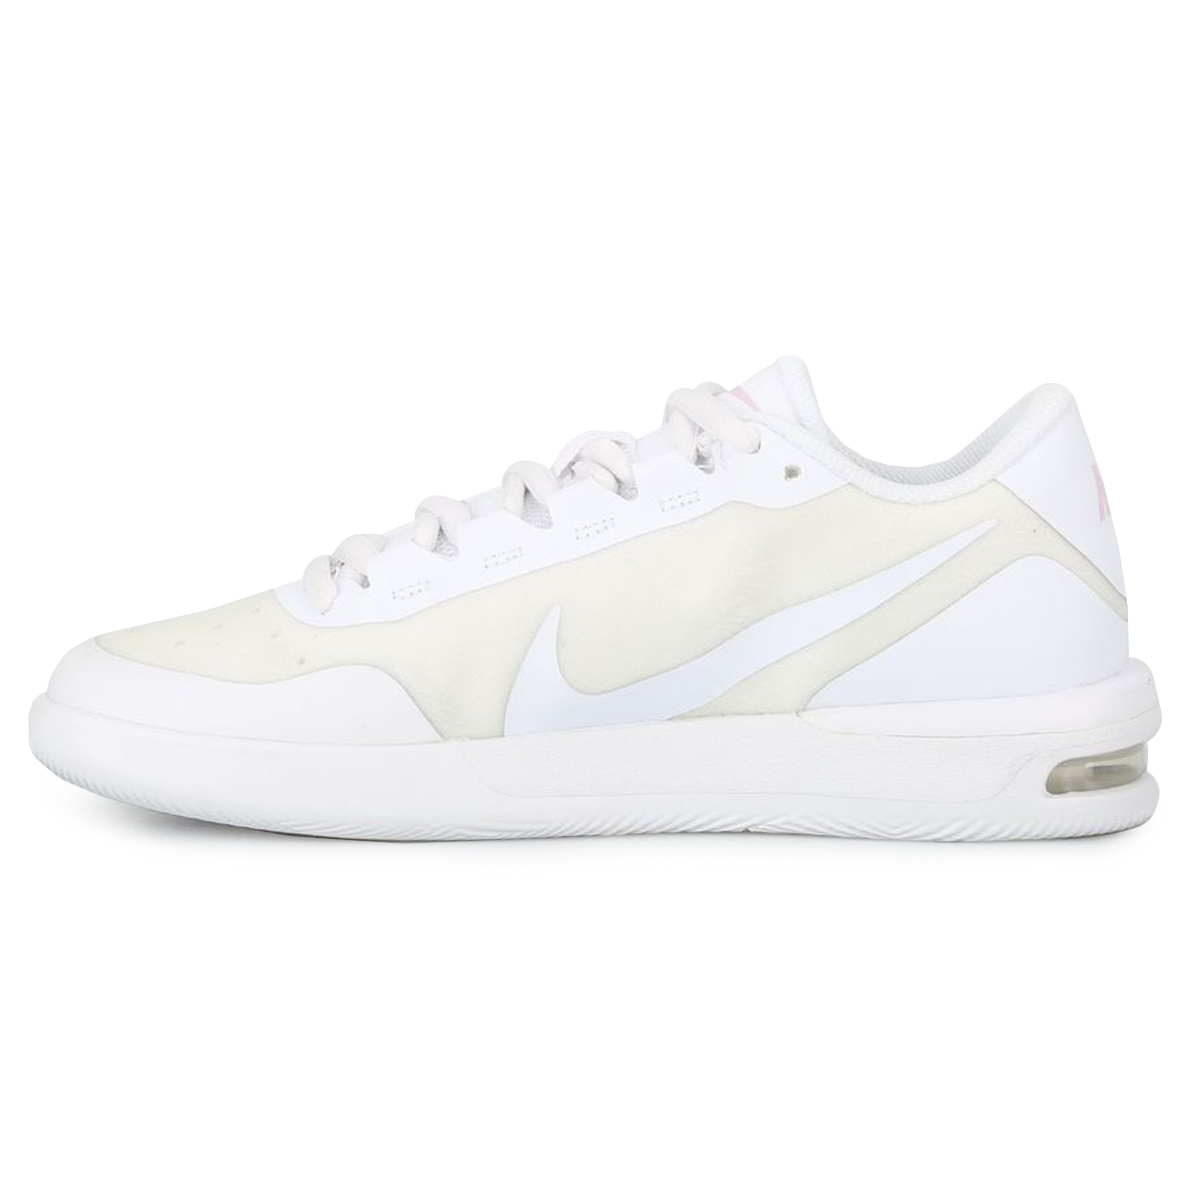 Zapatillas Nike Court Air Max Vapor Wing Ms,  image number null